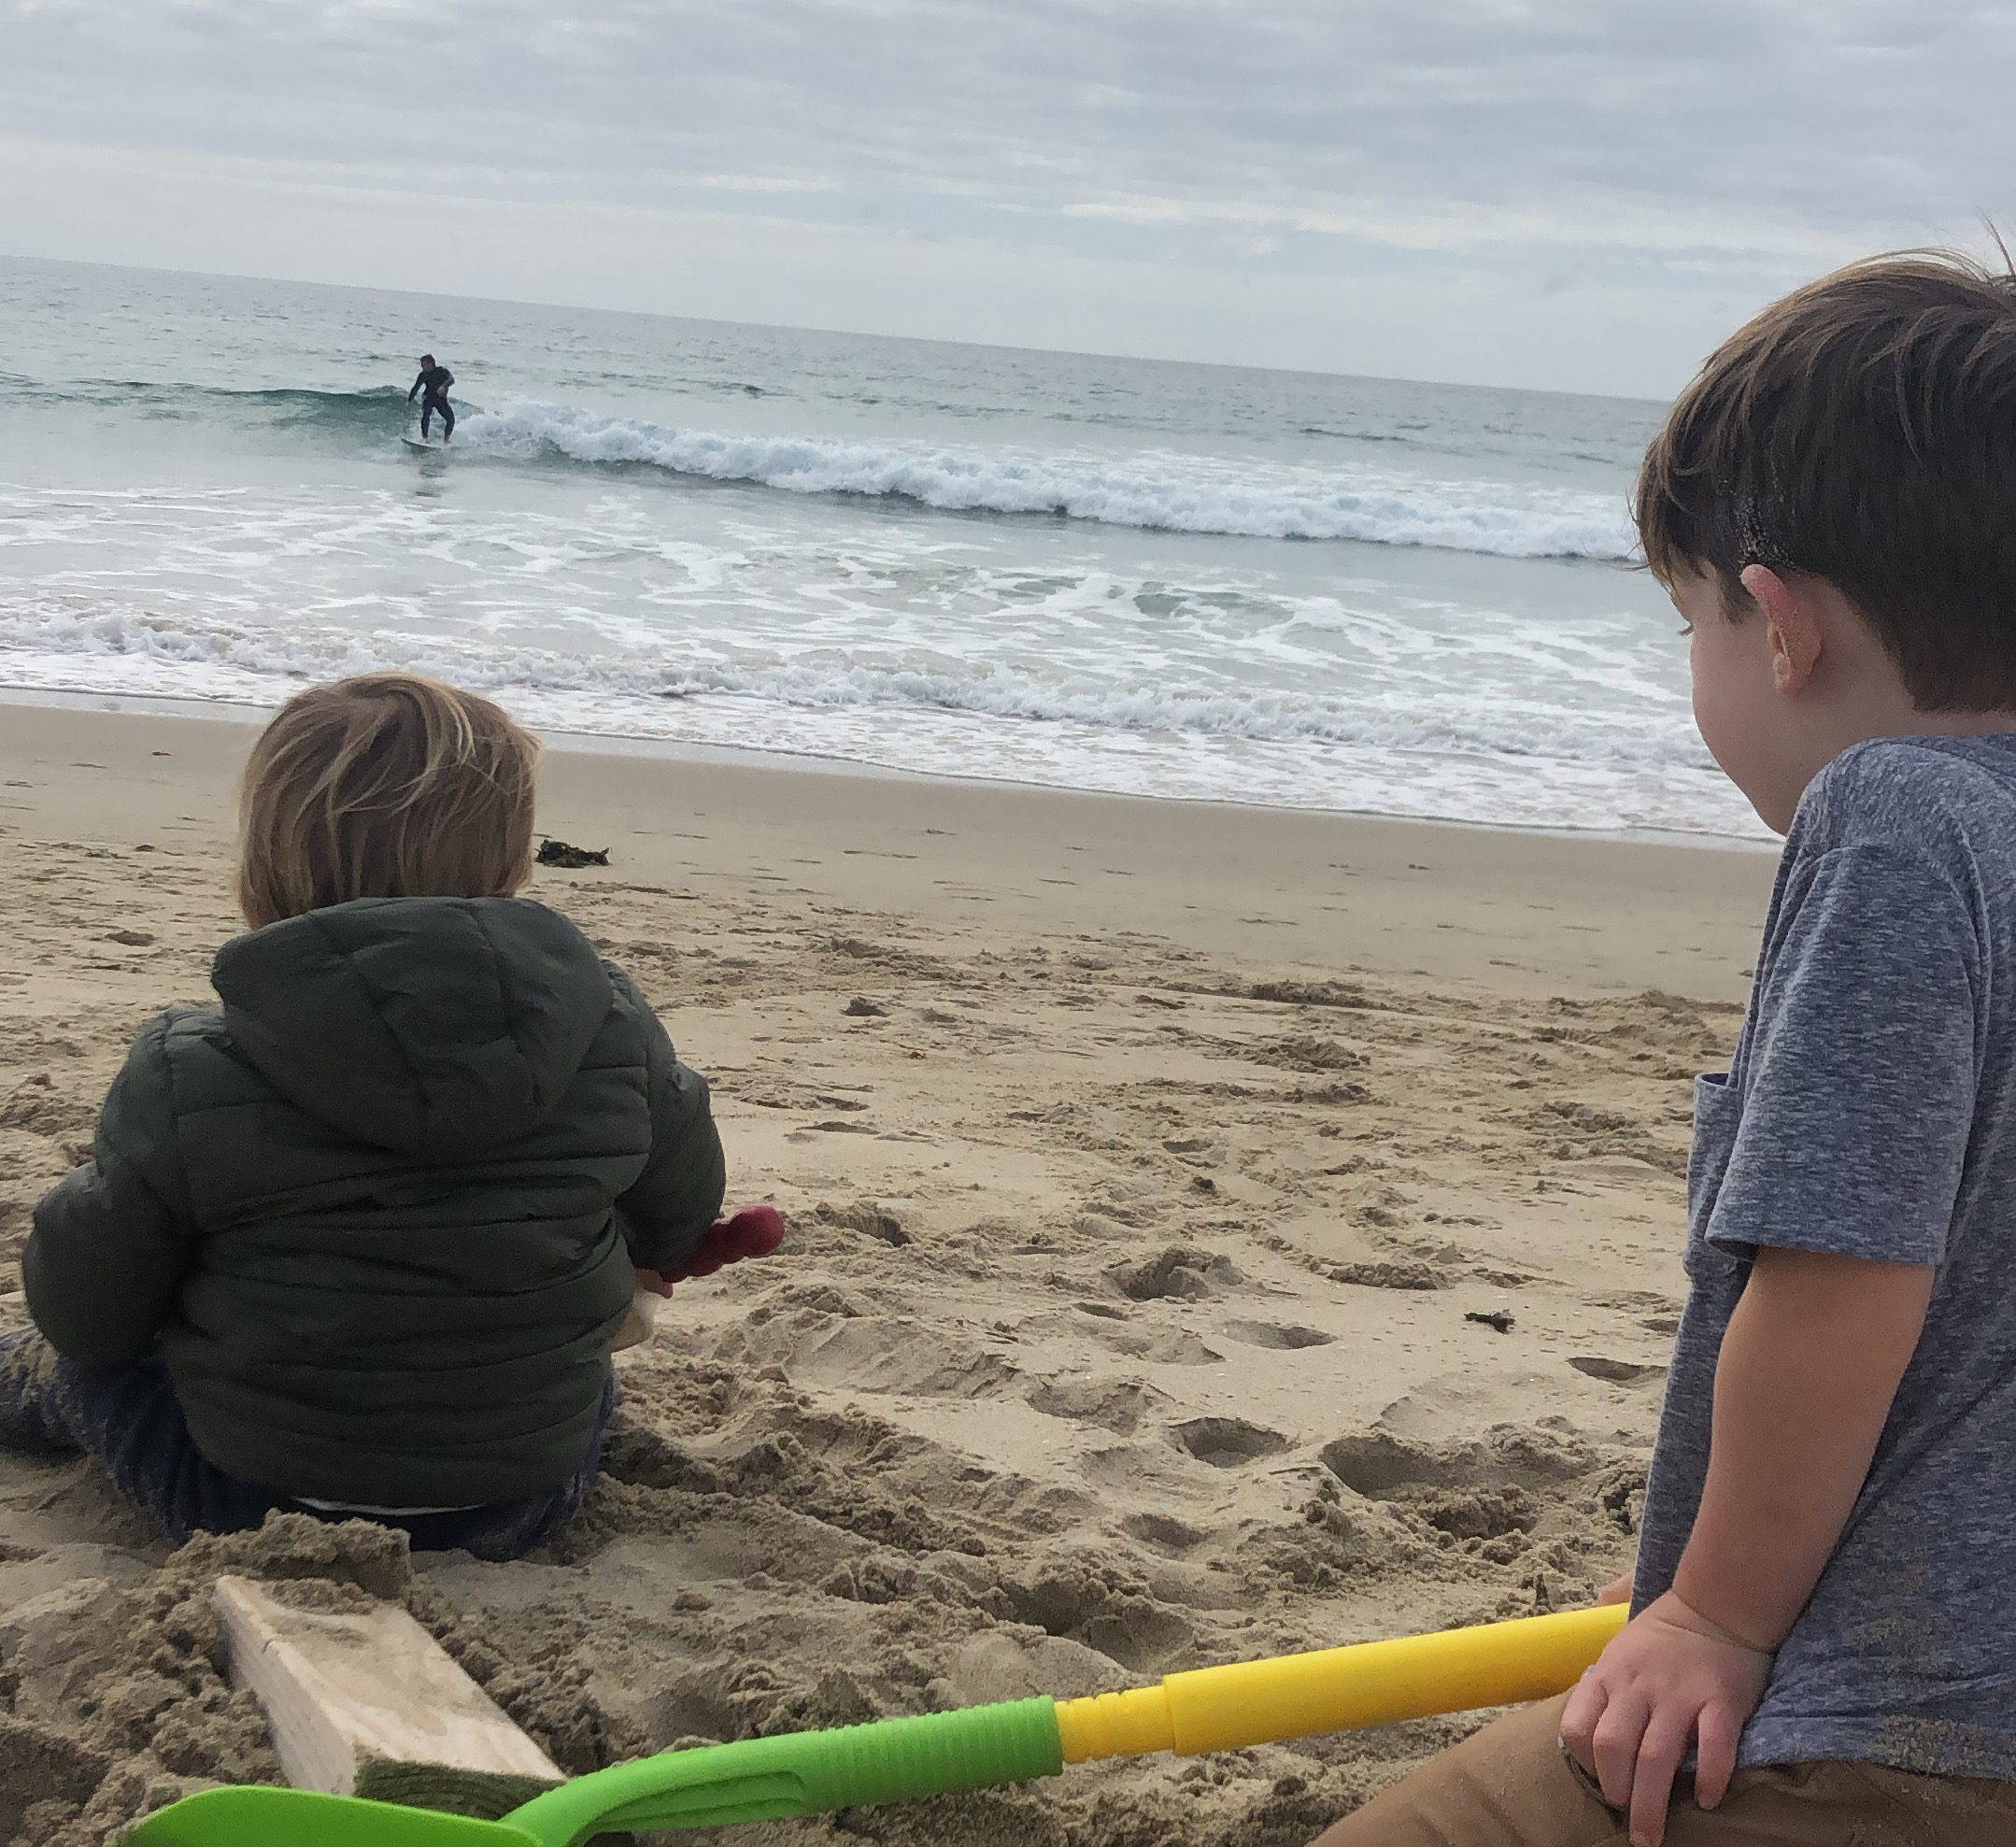 PHOTO: Lindsey Burrell reflected on a photo from the last moment of normalcy before her life and work were affected by coronavirus - a photo from March 15 of her kids, a four-year-old and an 18-month-old, sitting on the beach, watching their dad surf. 